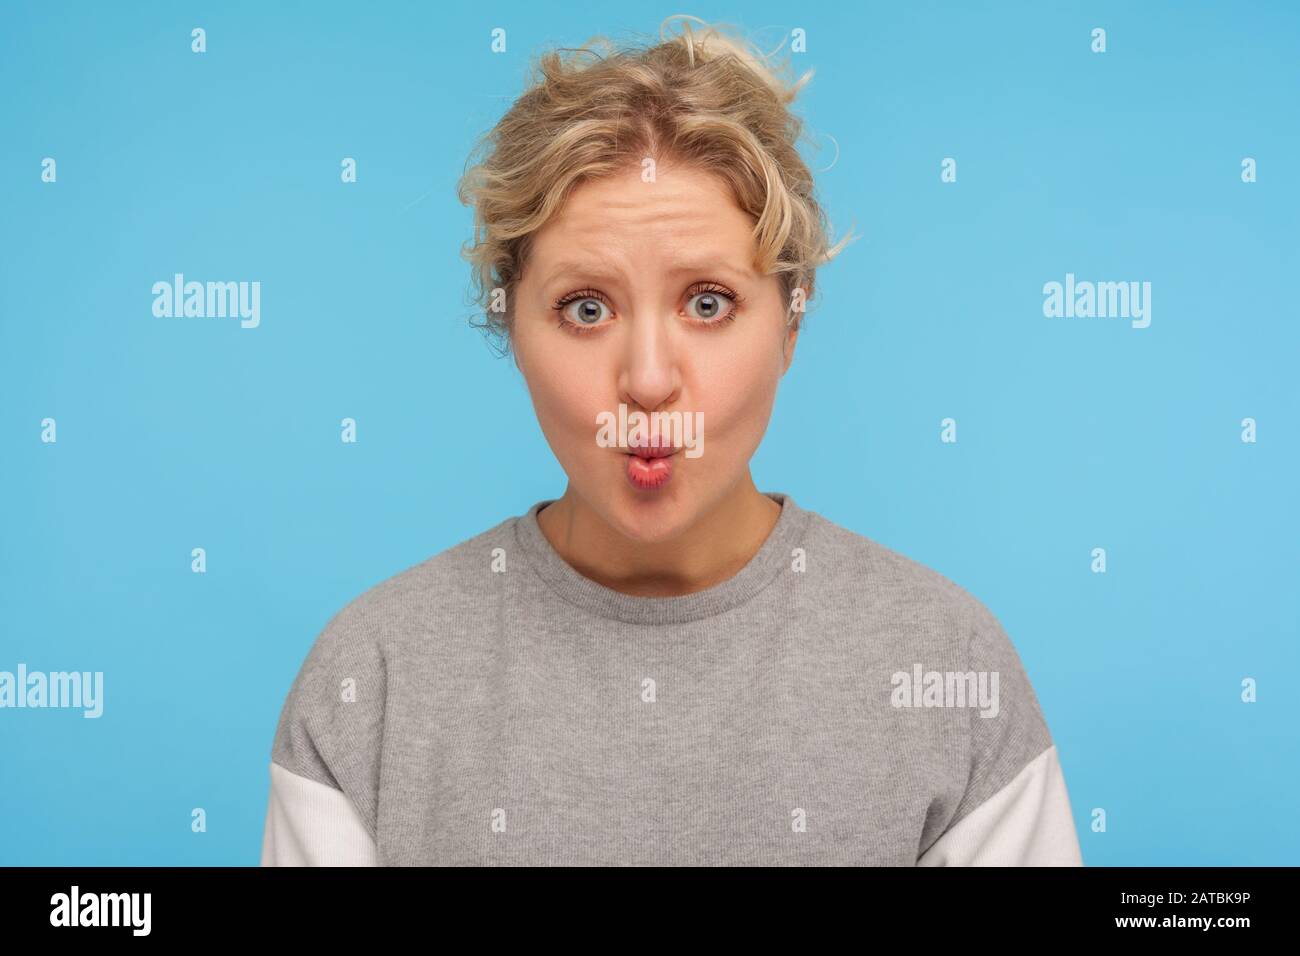 Funny woman with short hair in casual grey sweatshirt showing fish face with pout lips and big eyes, astonished surprised expression, making faces. in Stock Photo